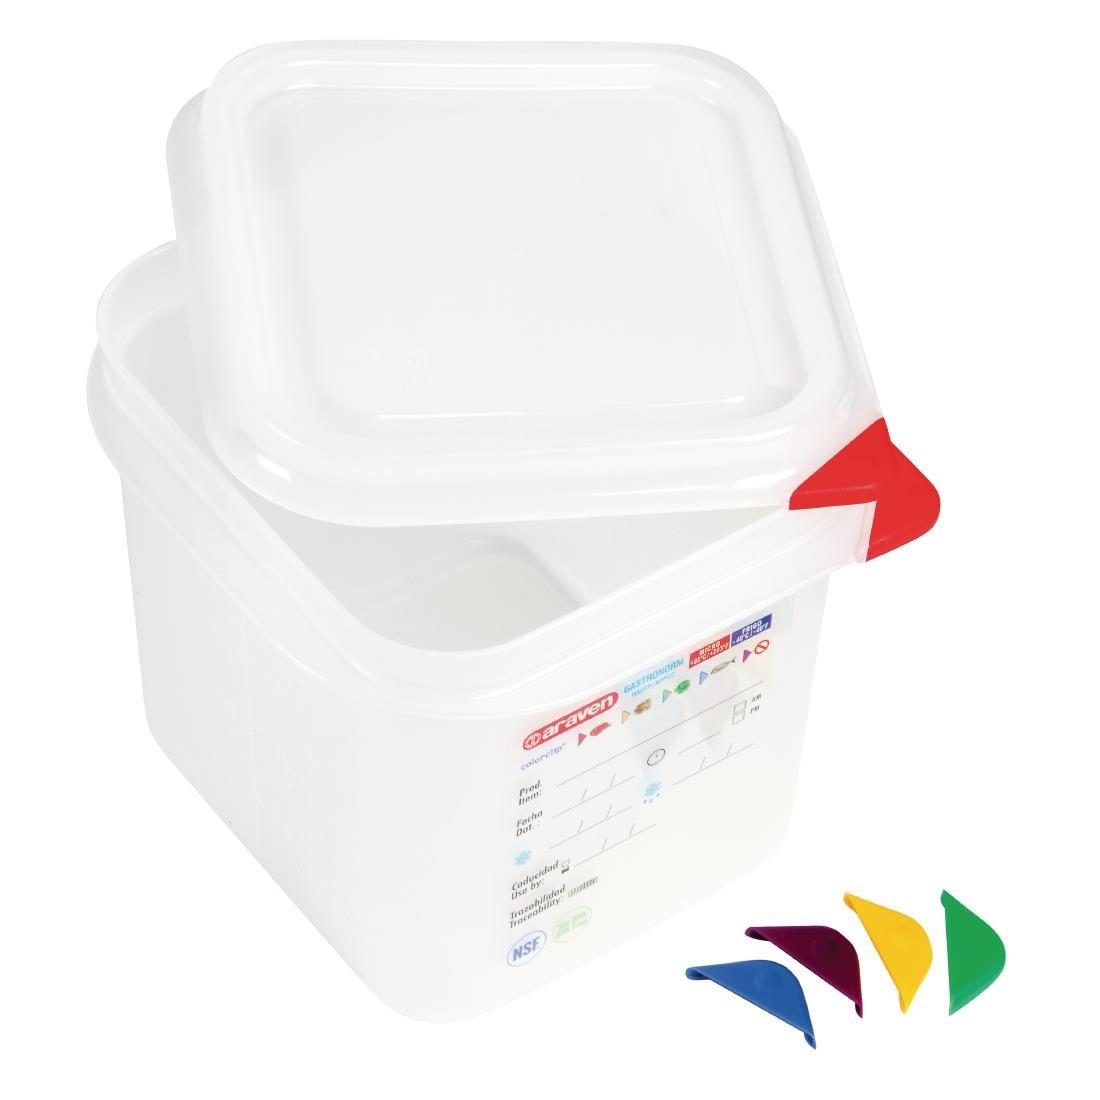 Araven Polypropylene 1/6 Gastronorm Food Containers 2.6Ltr (Pack of 4) - T984  - 2